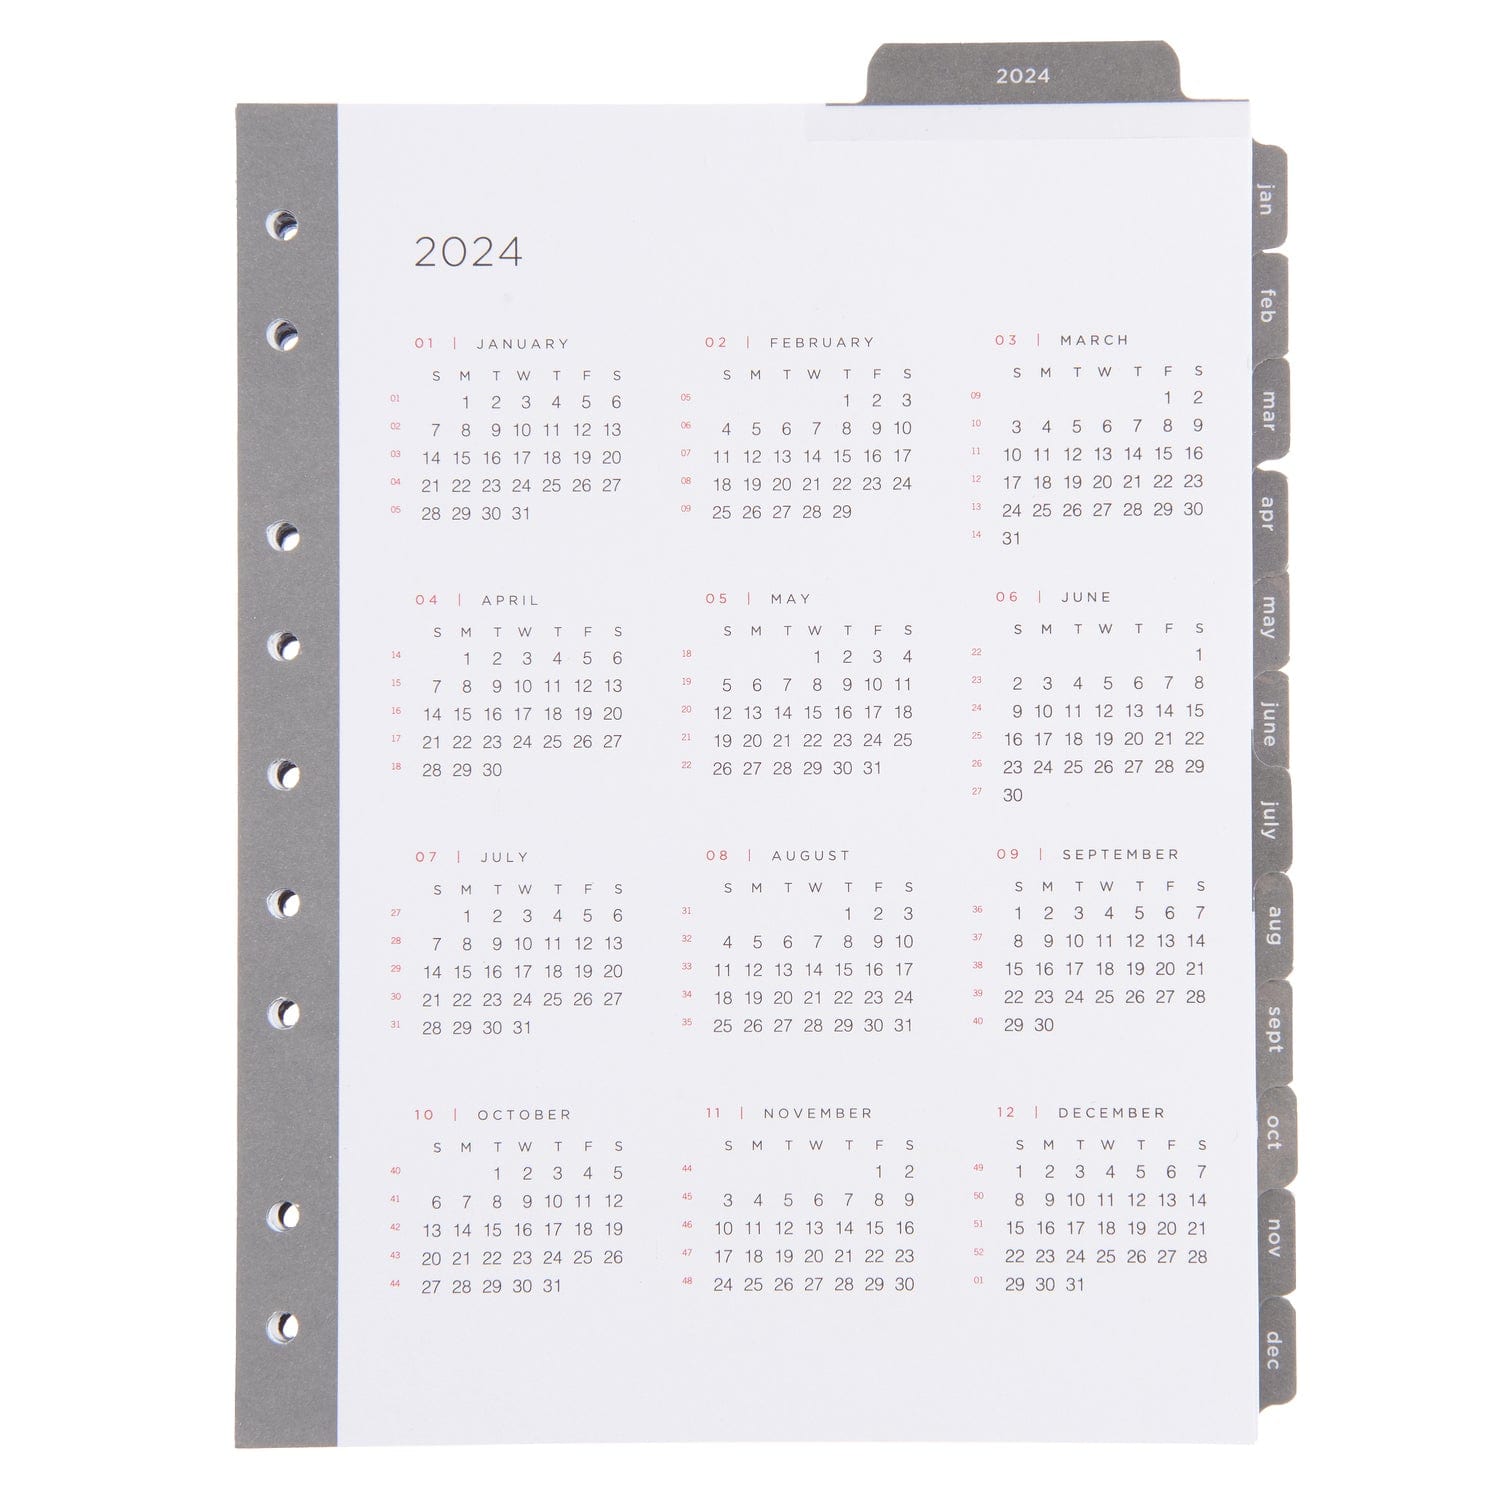 50 Pack of 2024 Mini Calendar Tabs 12 Pages With Sewn Binding